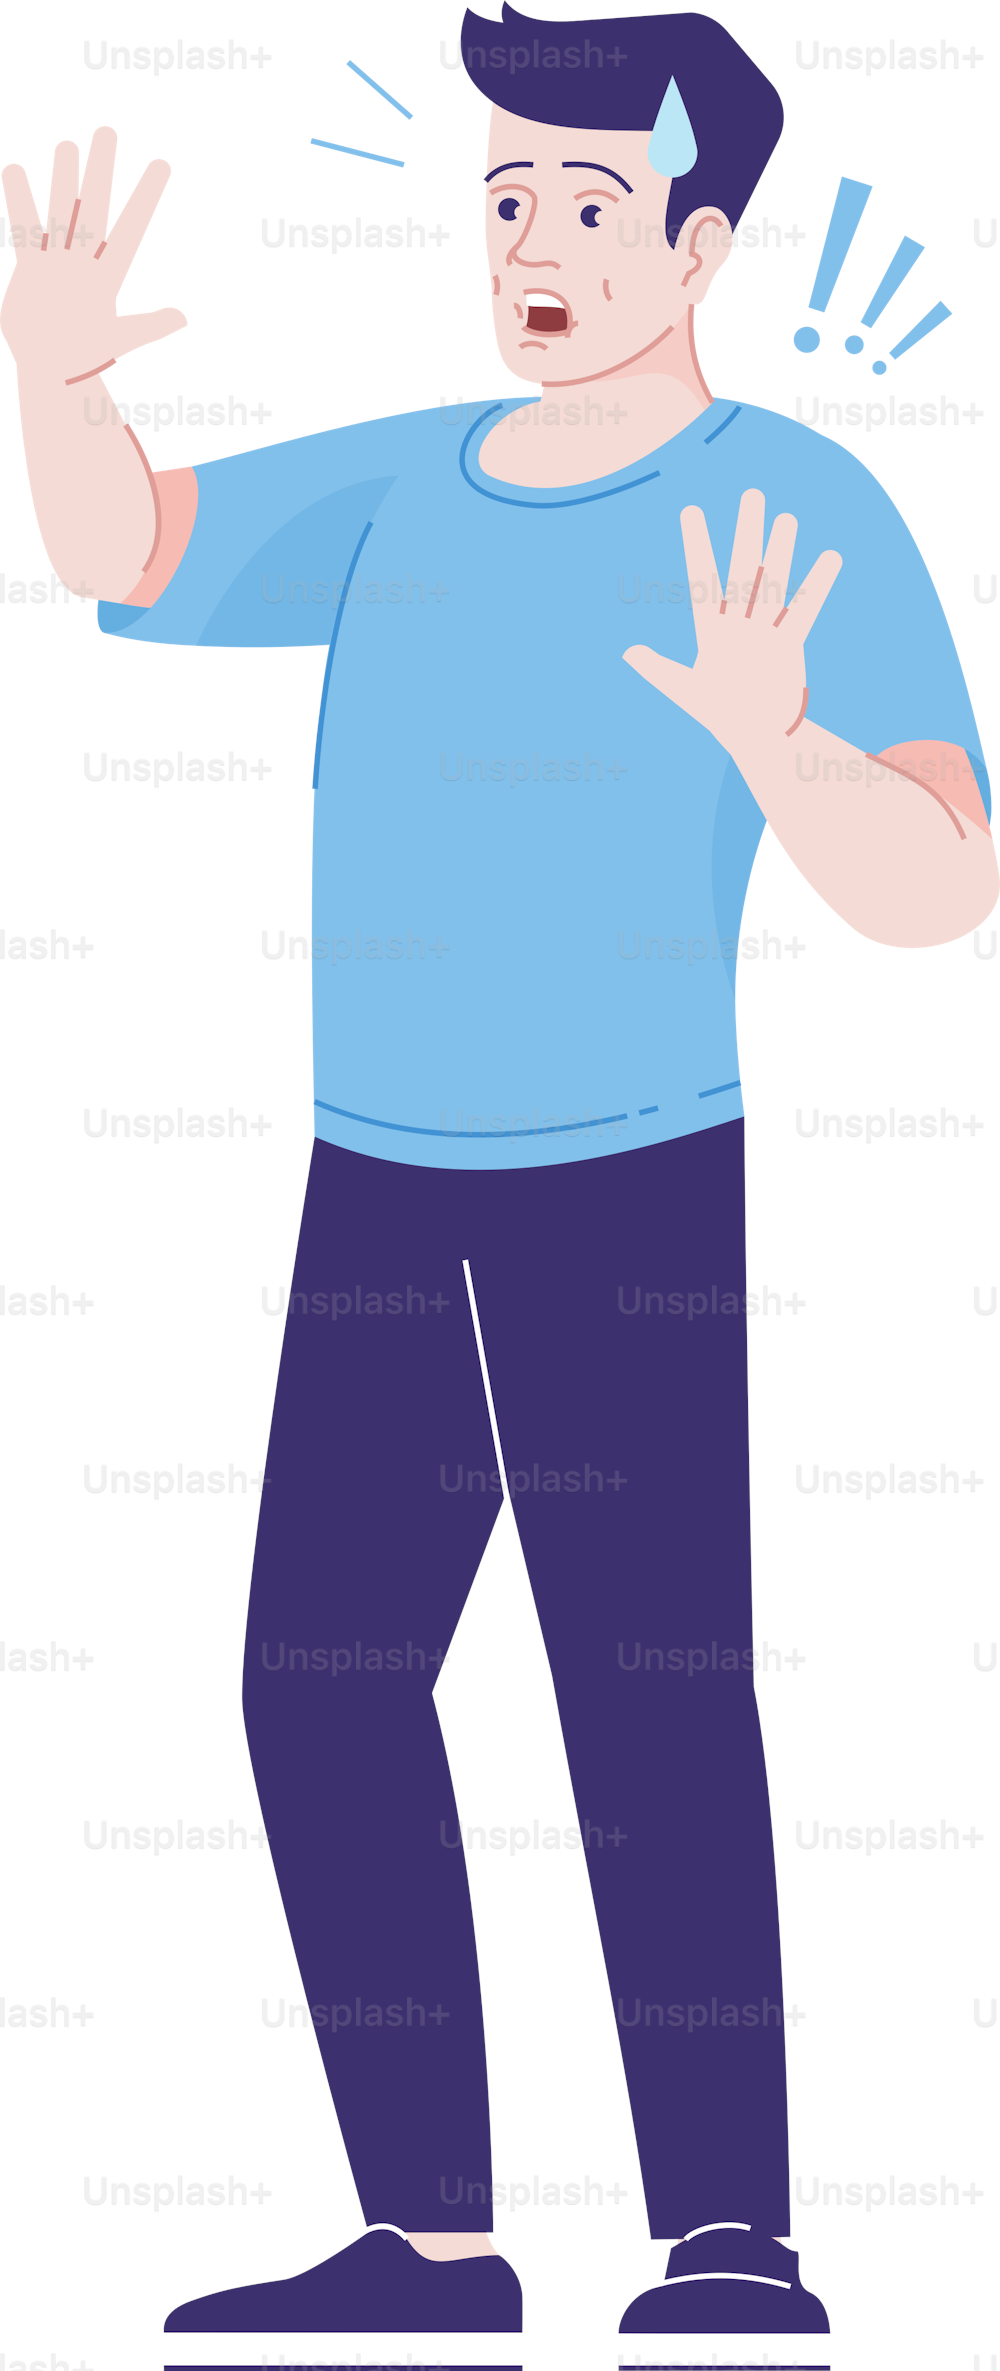 Scared man flat vector illustration. Male fear of violence. Person with anxious facial expression and defensive gesture isolated cartoon character with outline elements on white background